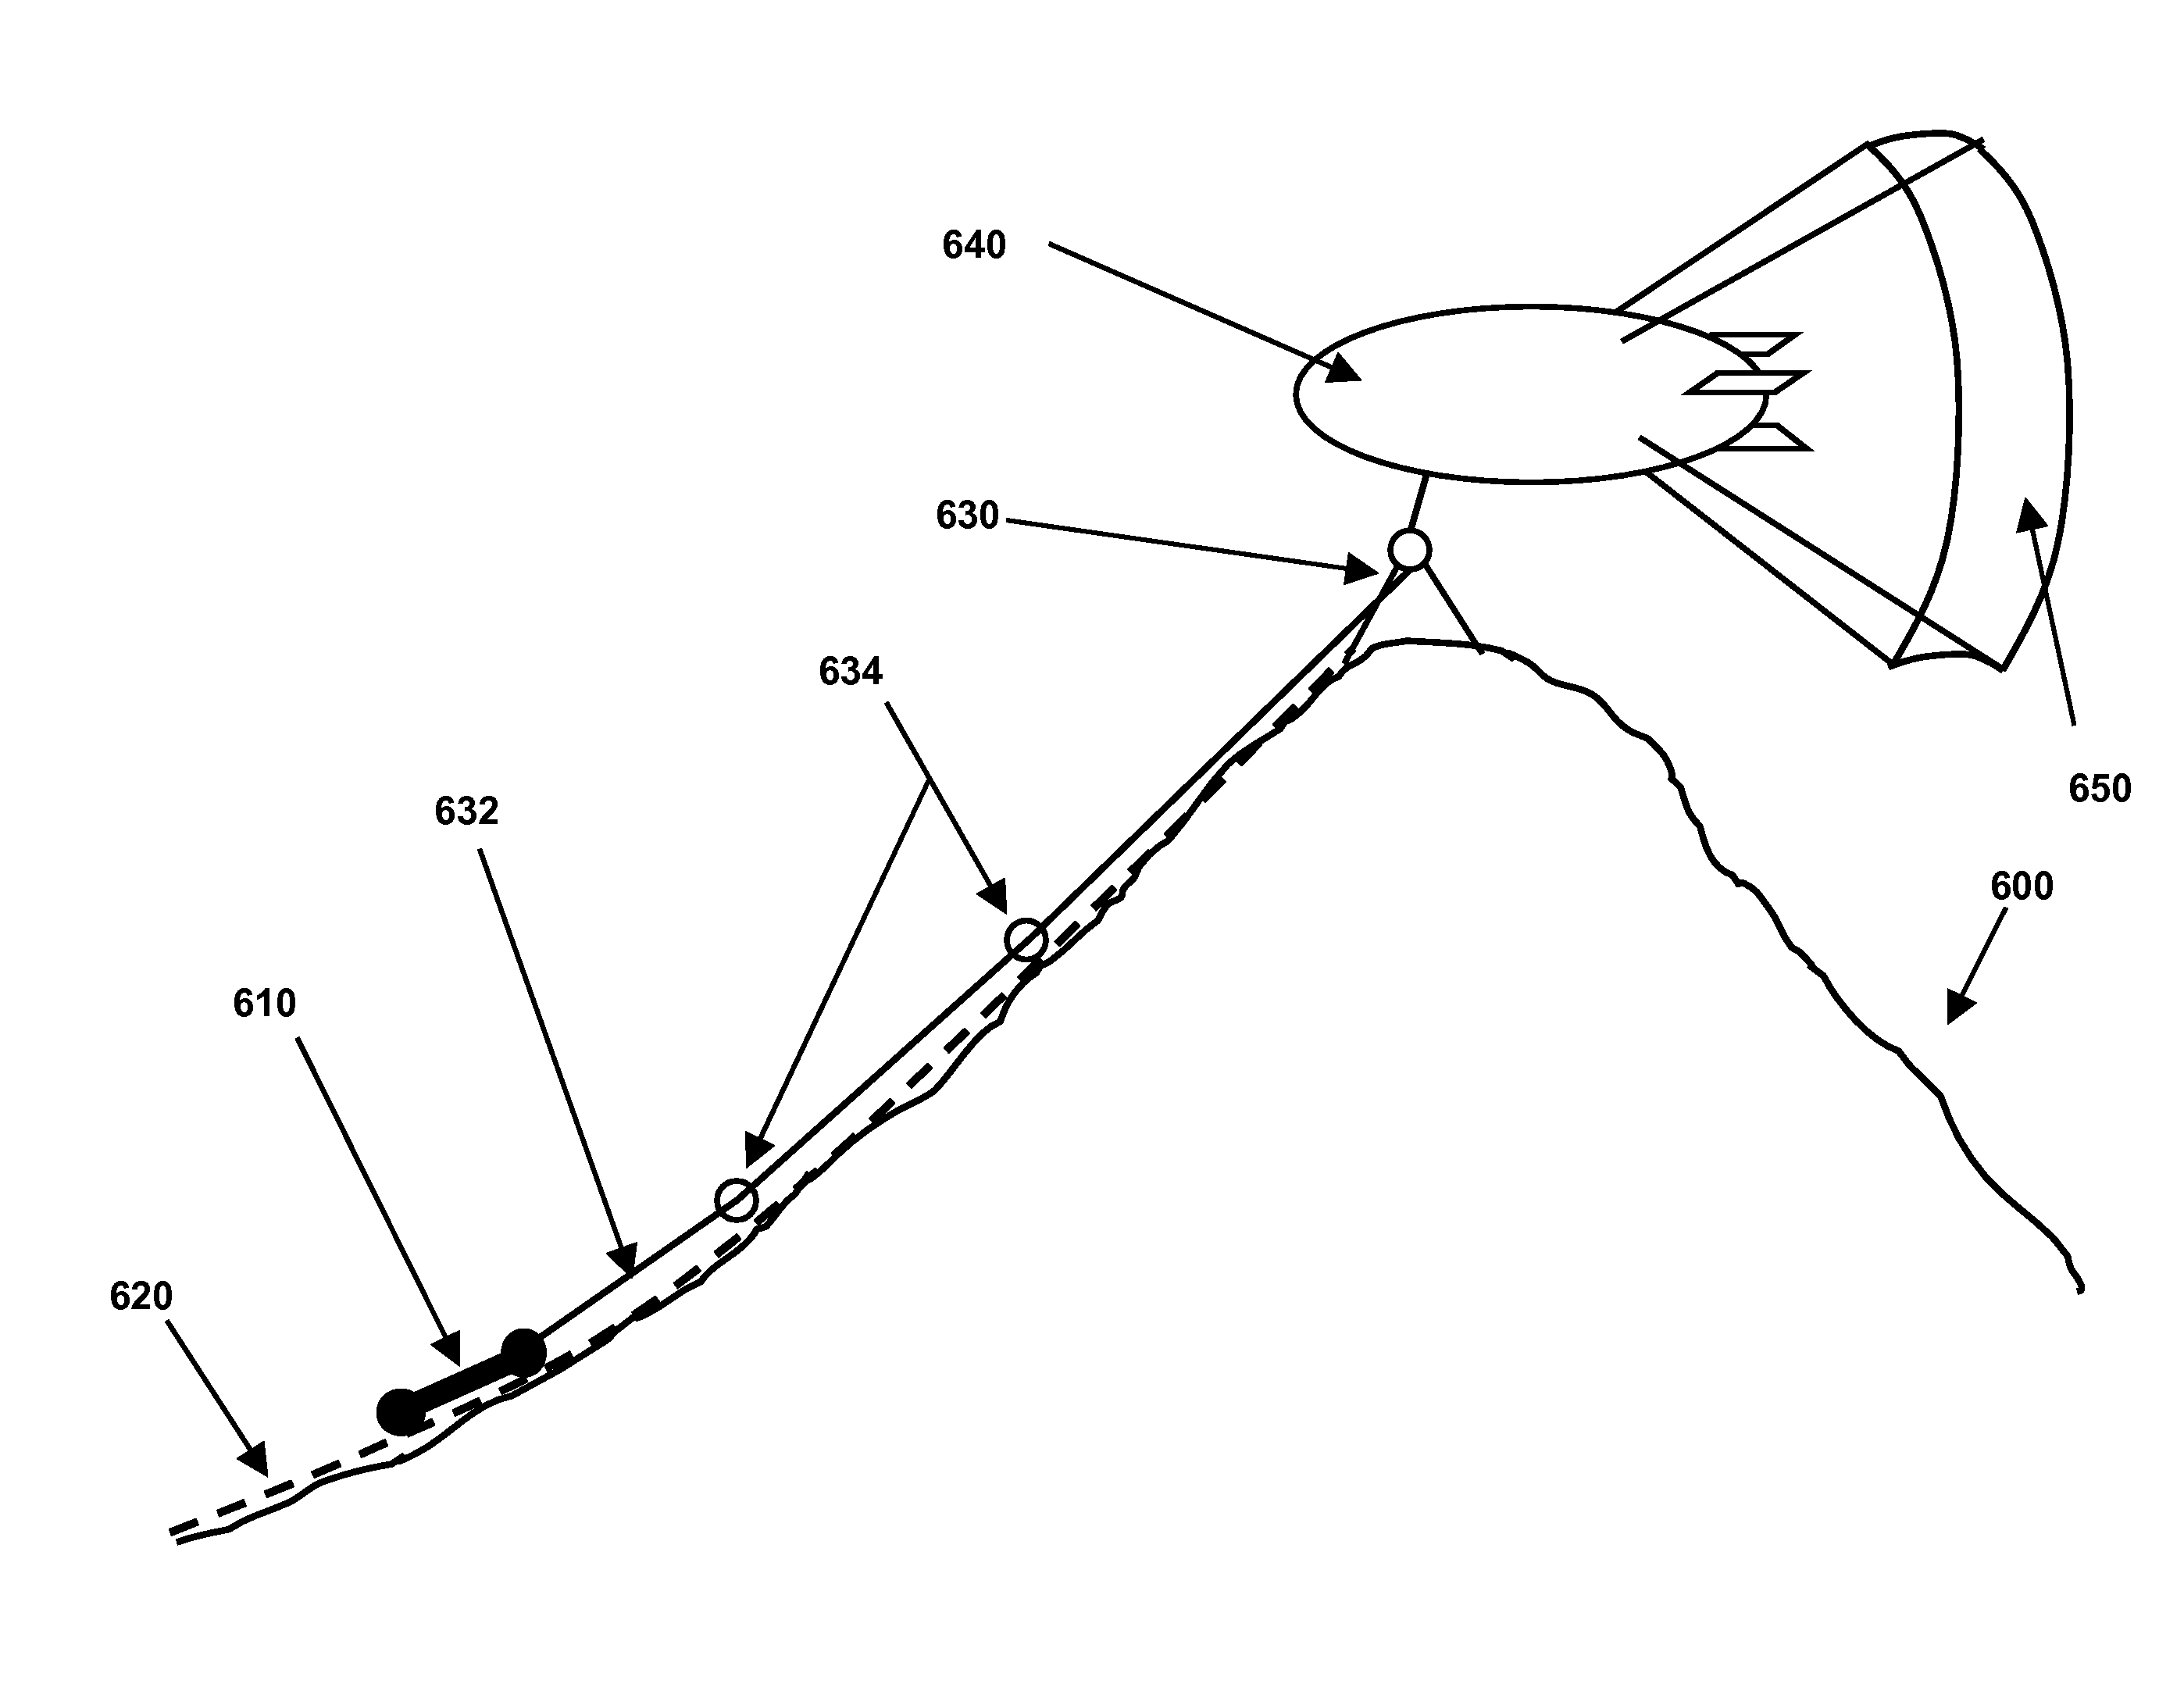 Reciprocating system with buoyant aircraft, spinnaker sail, and heavy cars for generating electric power